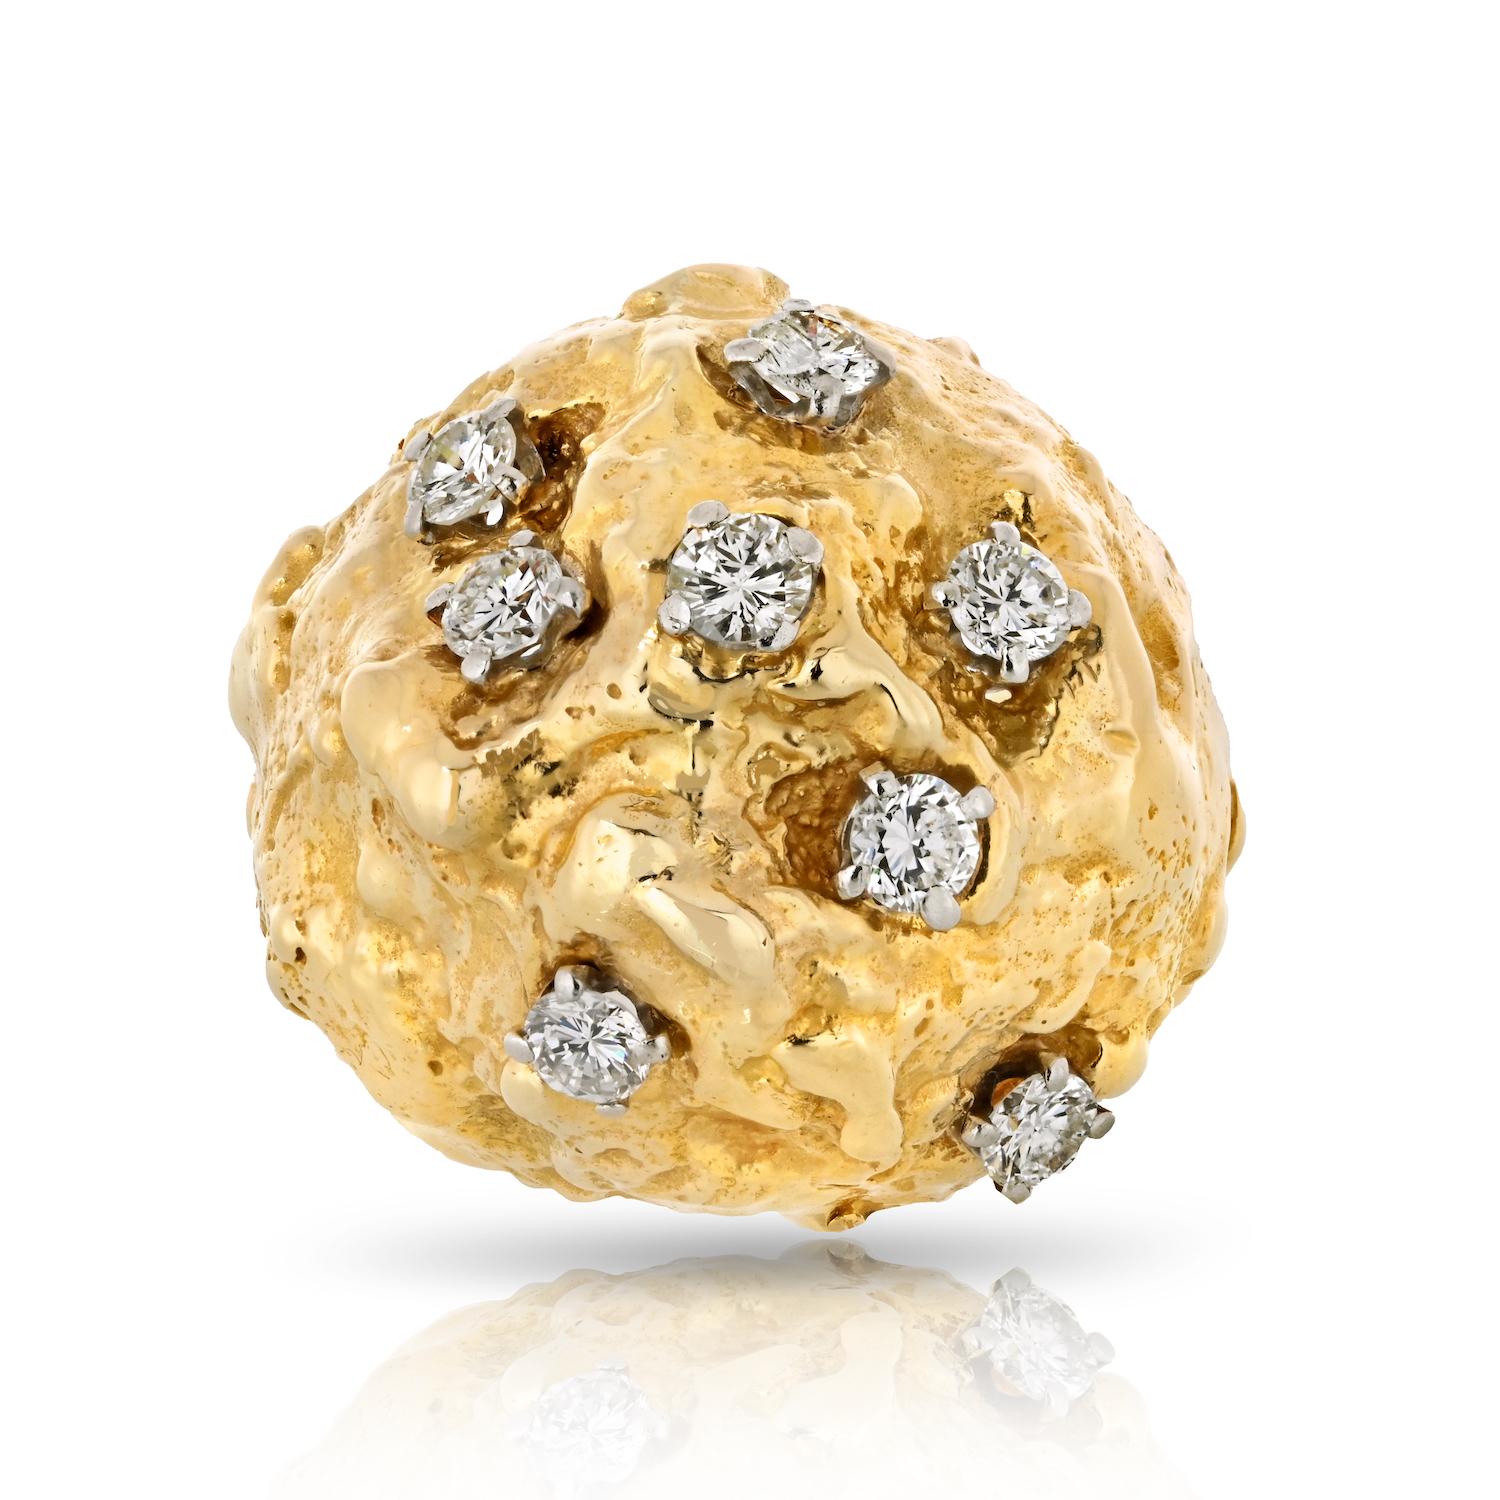 Behold a remarkable piece from the 1970s the David Webb Platinum & 18K Yellow Gold Hammered Diamond Dome Ring. This exquisite ring is a testament to timeless style and expert craftsmanship. Its captivating design showcases 8 brilliant round-cut